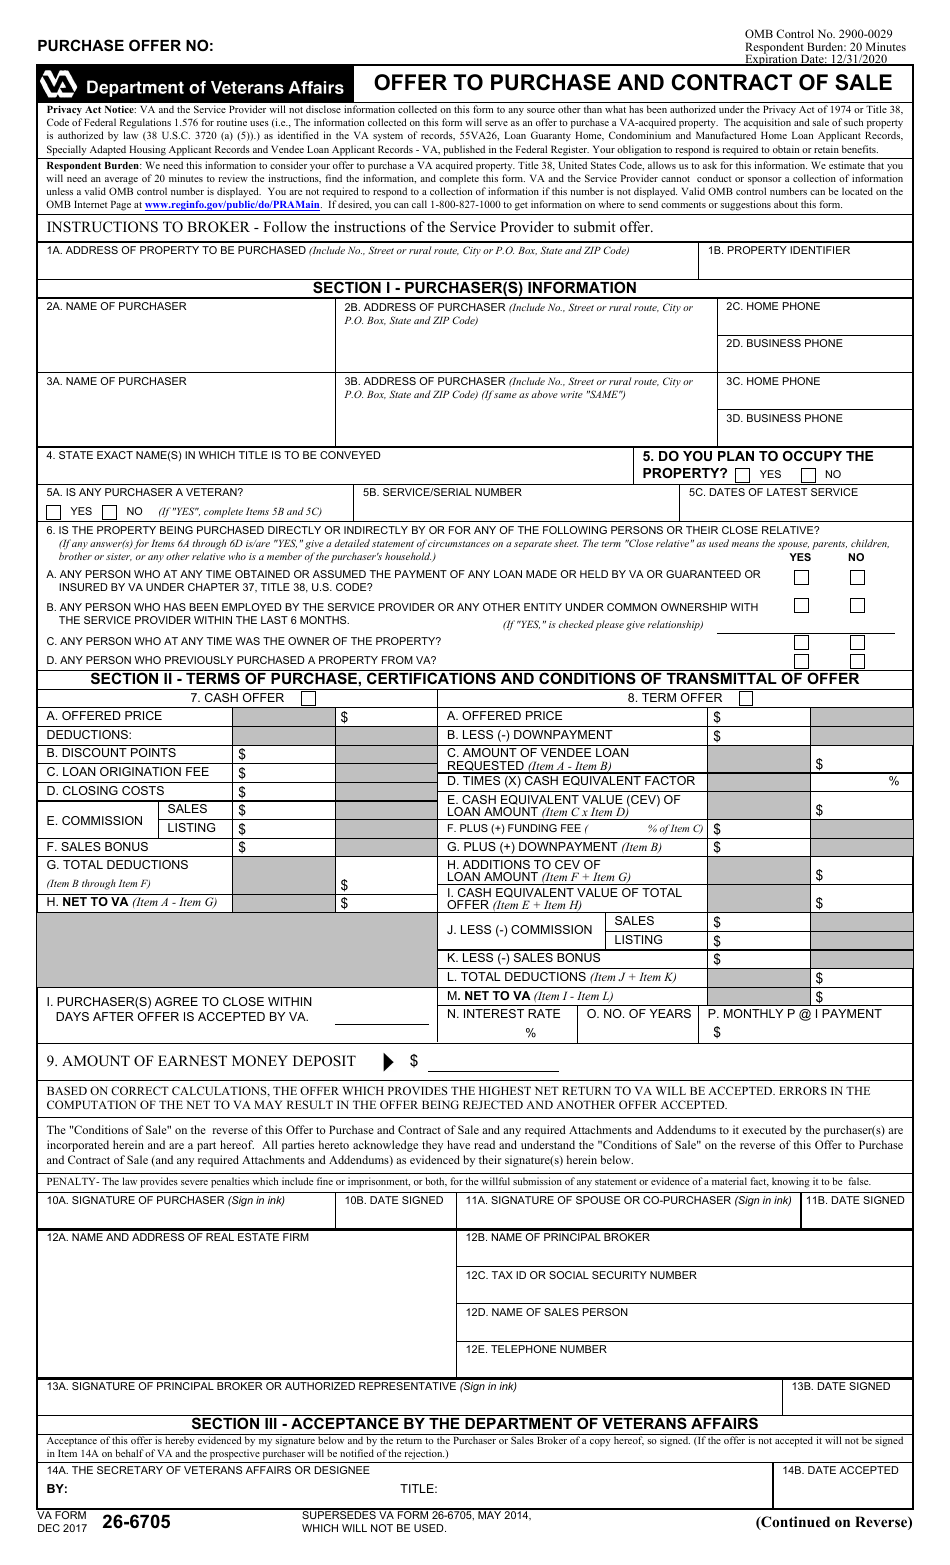 VA Form 26-6705 Offer to Purchase and Contract of Sale, Page 1